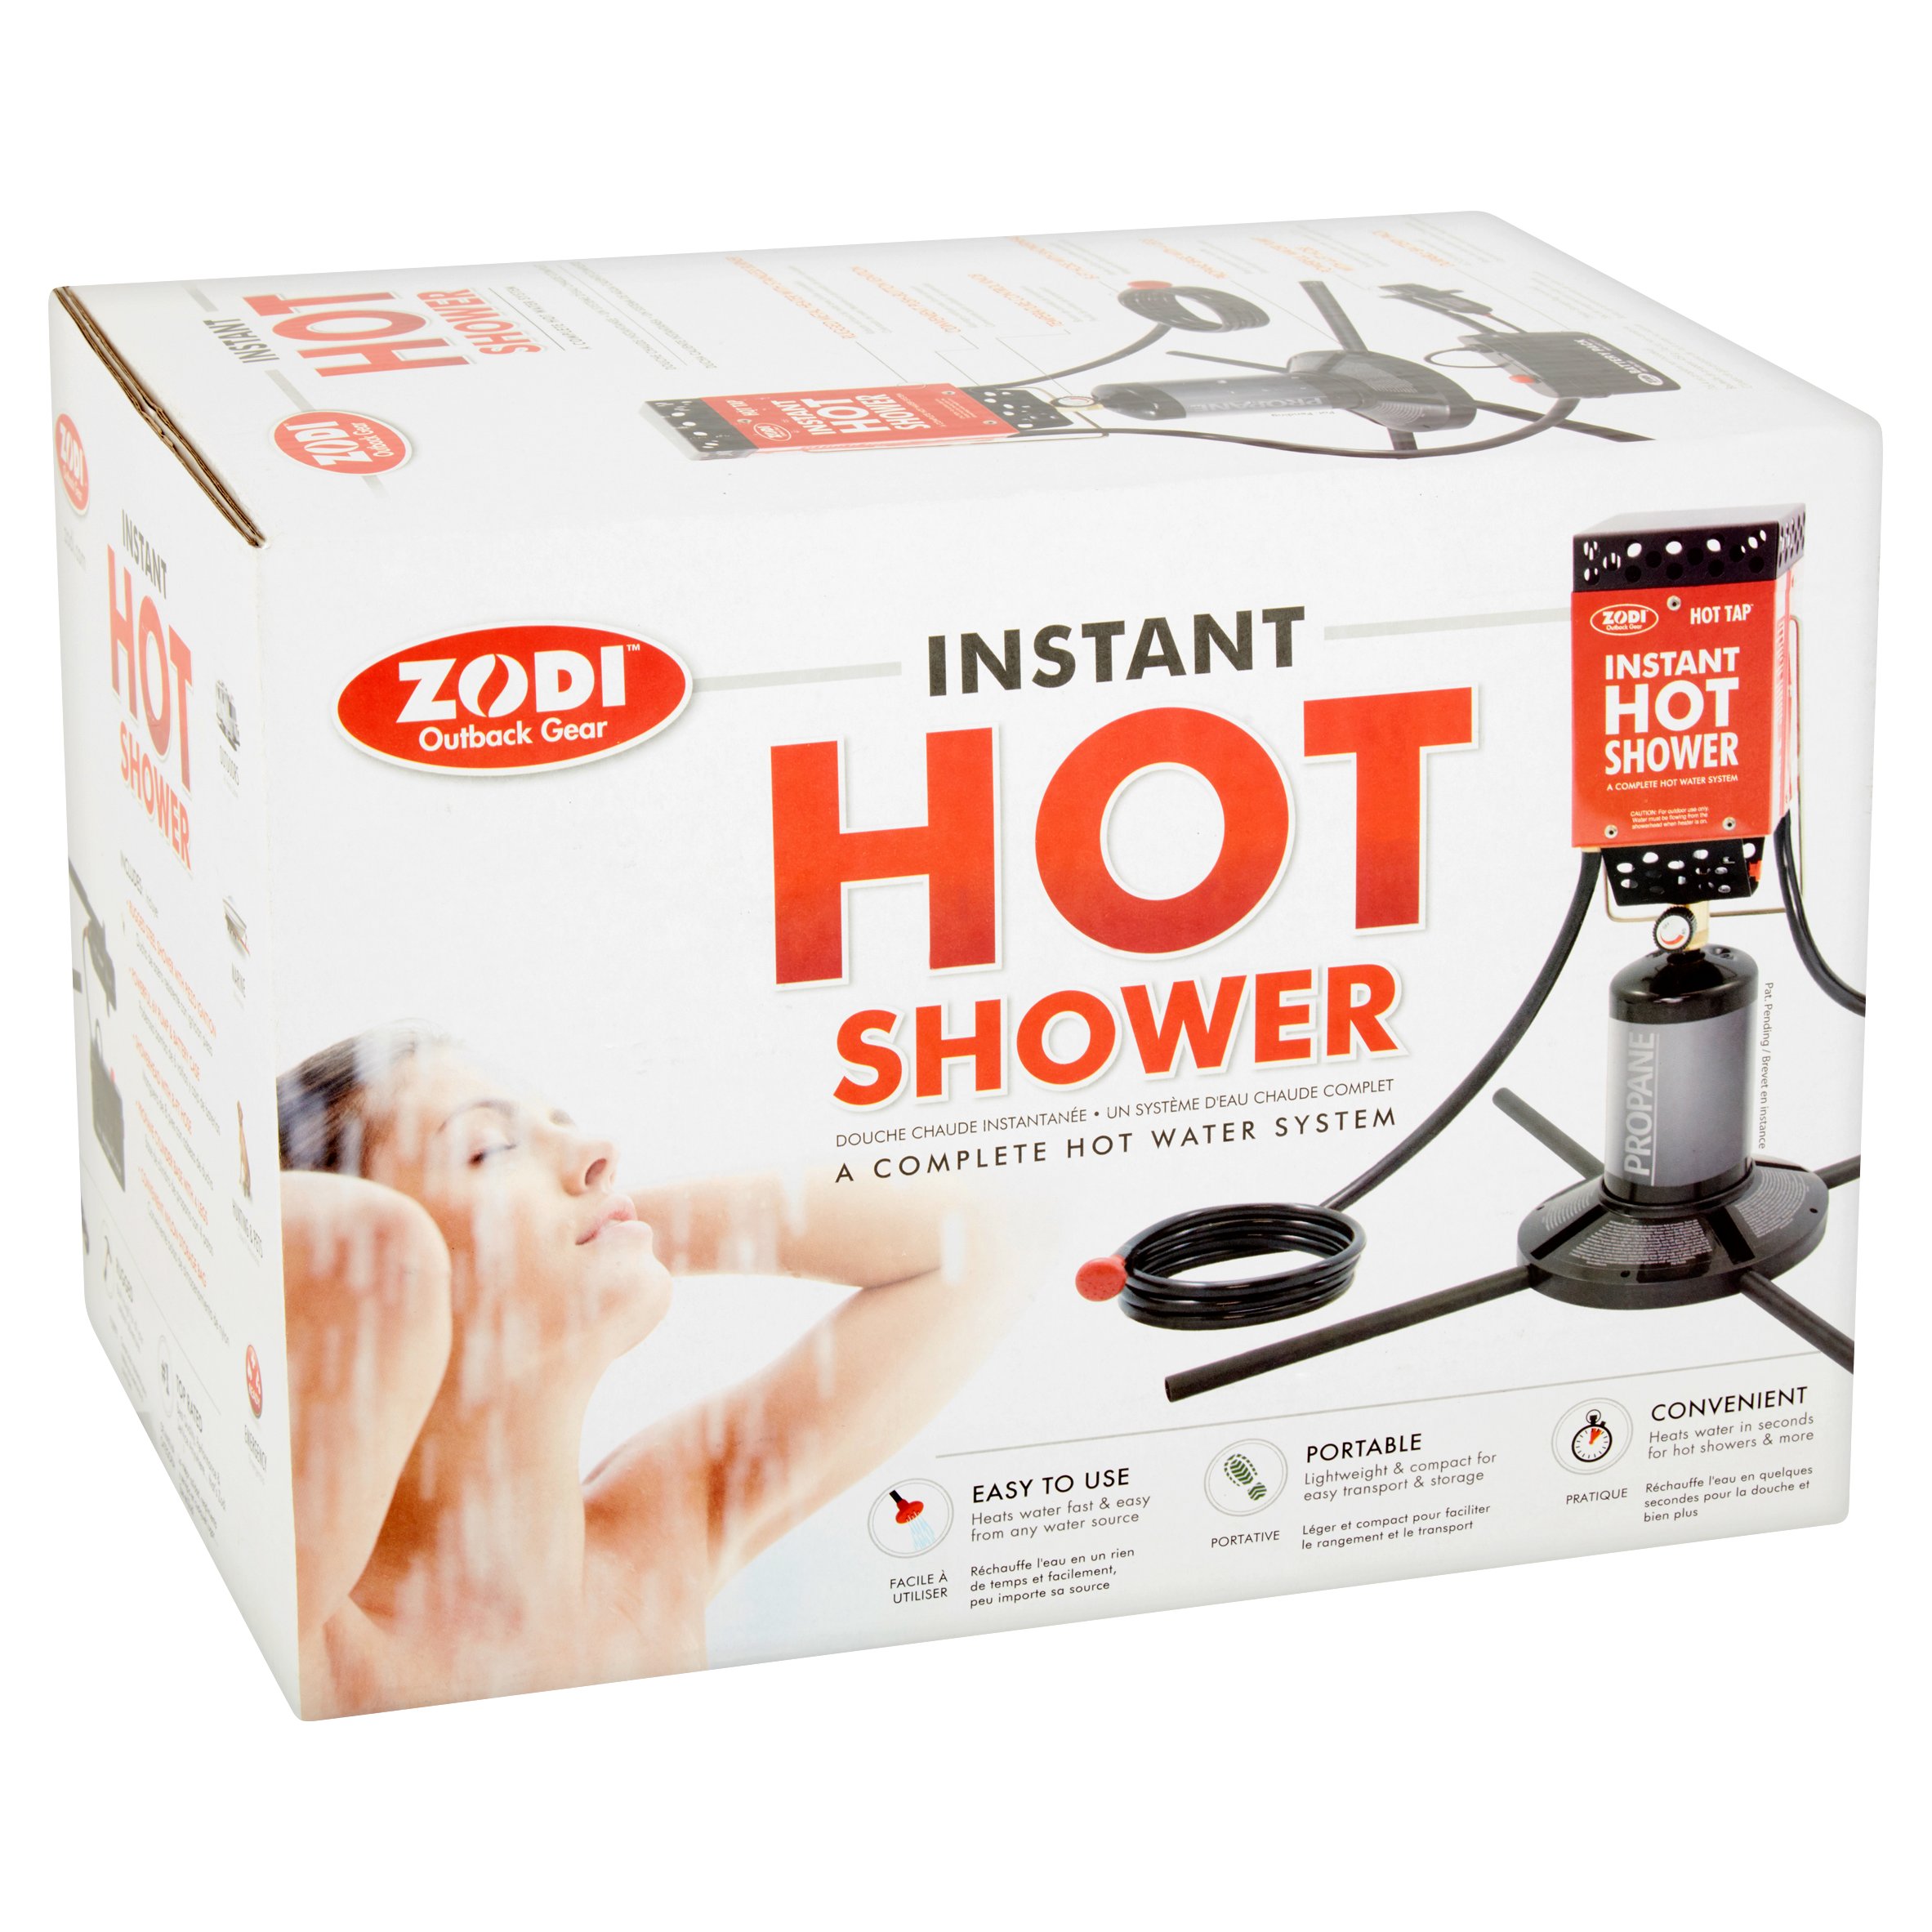 Zodi Outback Gear Instant Hot Shower - image 2 of 5